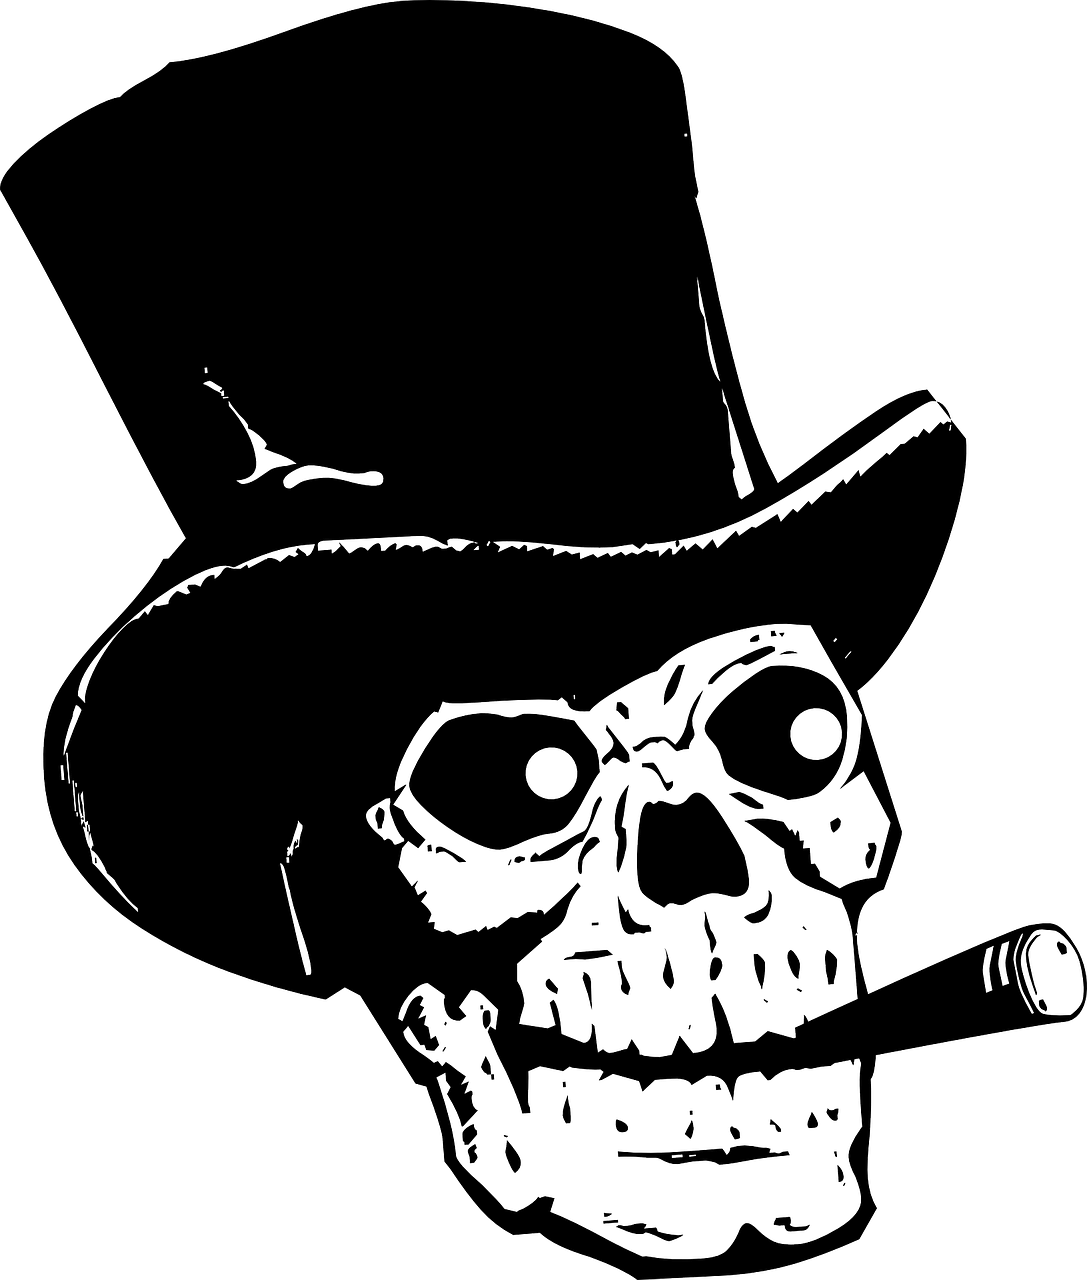 Skull with a top hat smoking a cigar